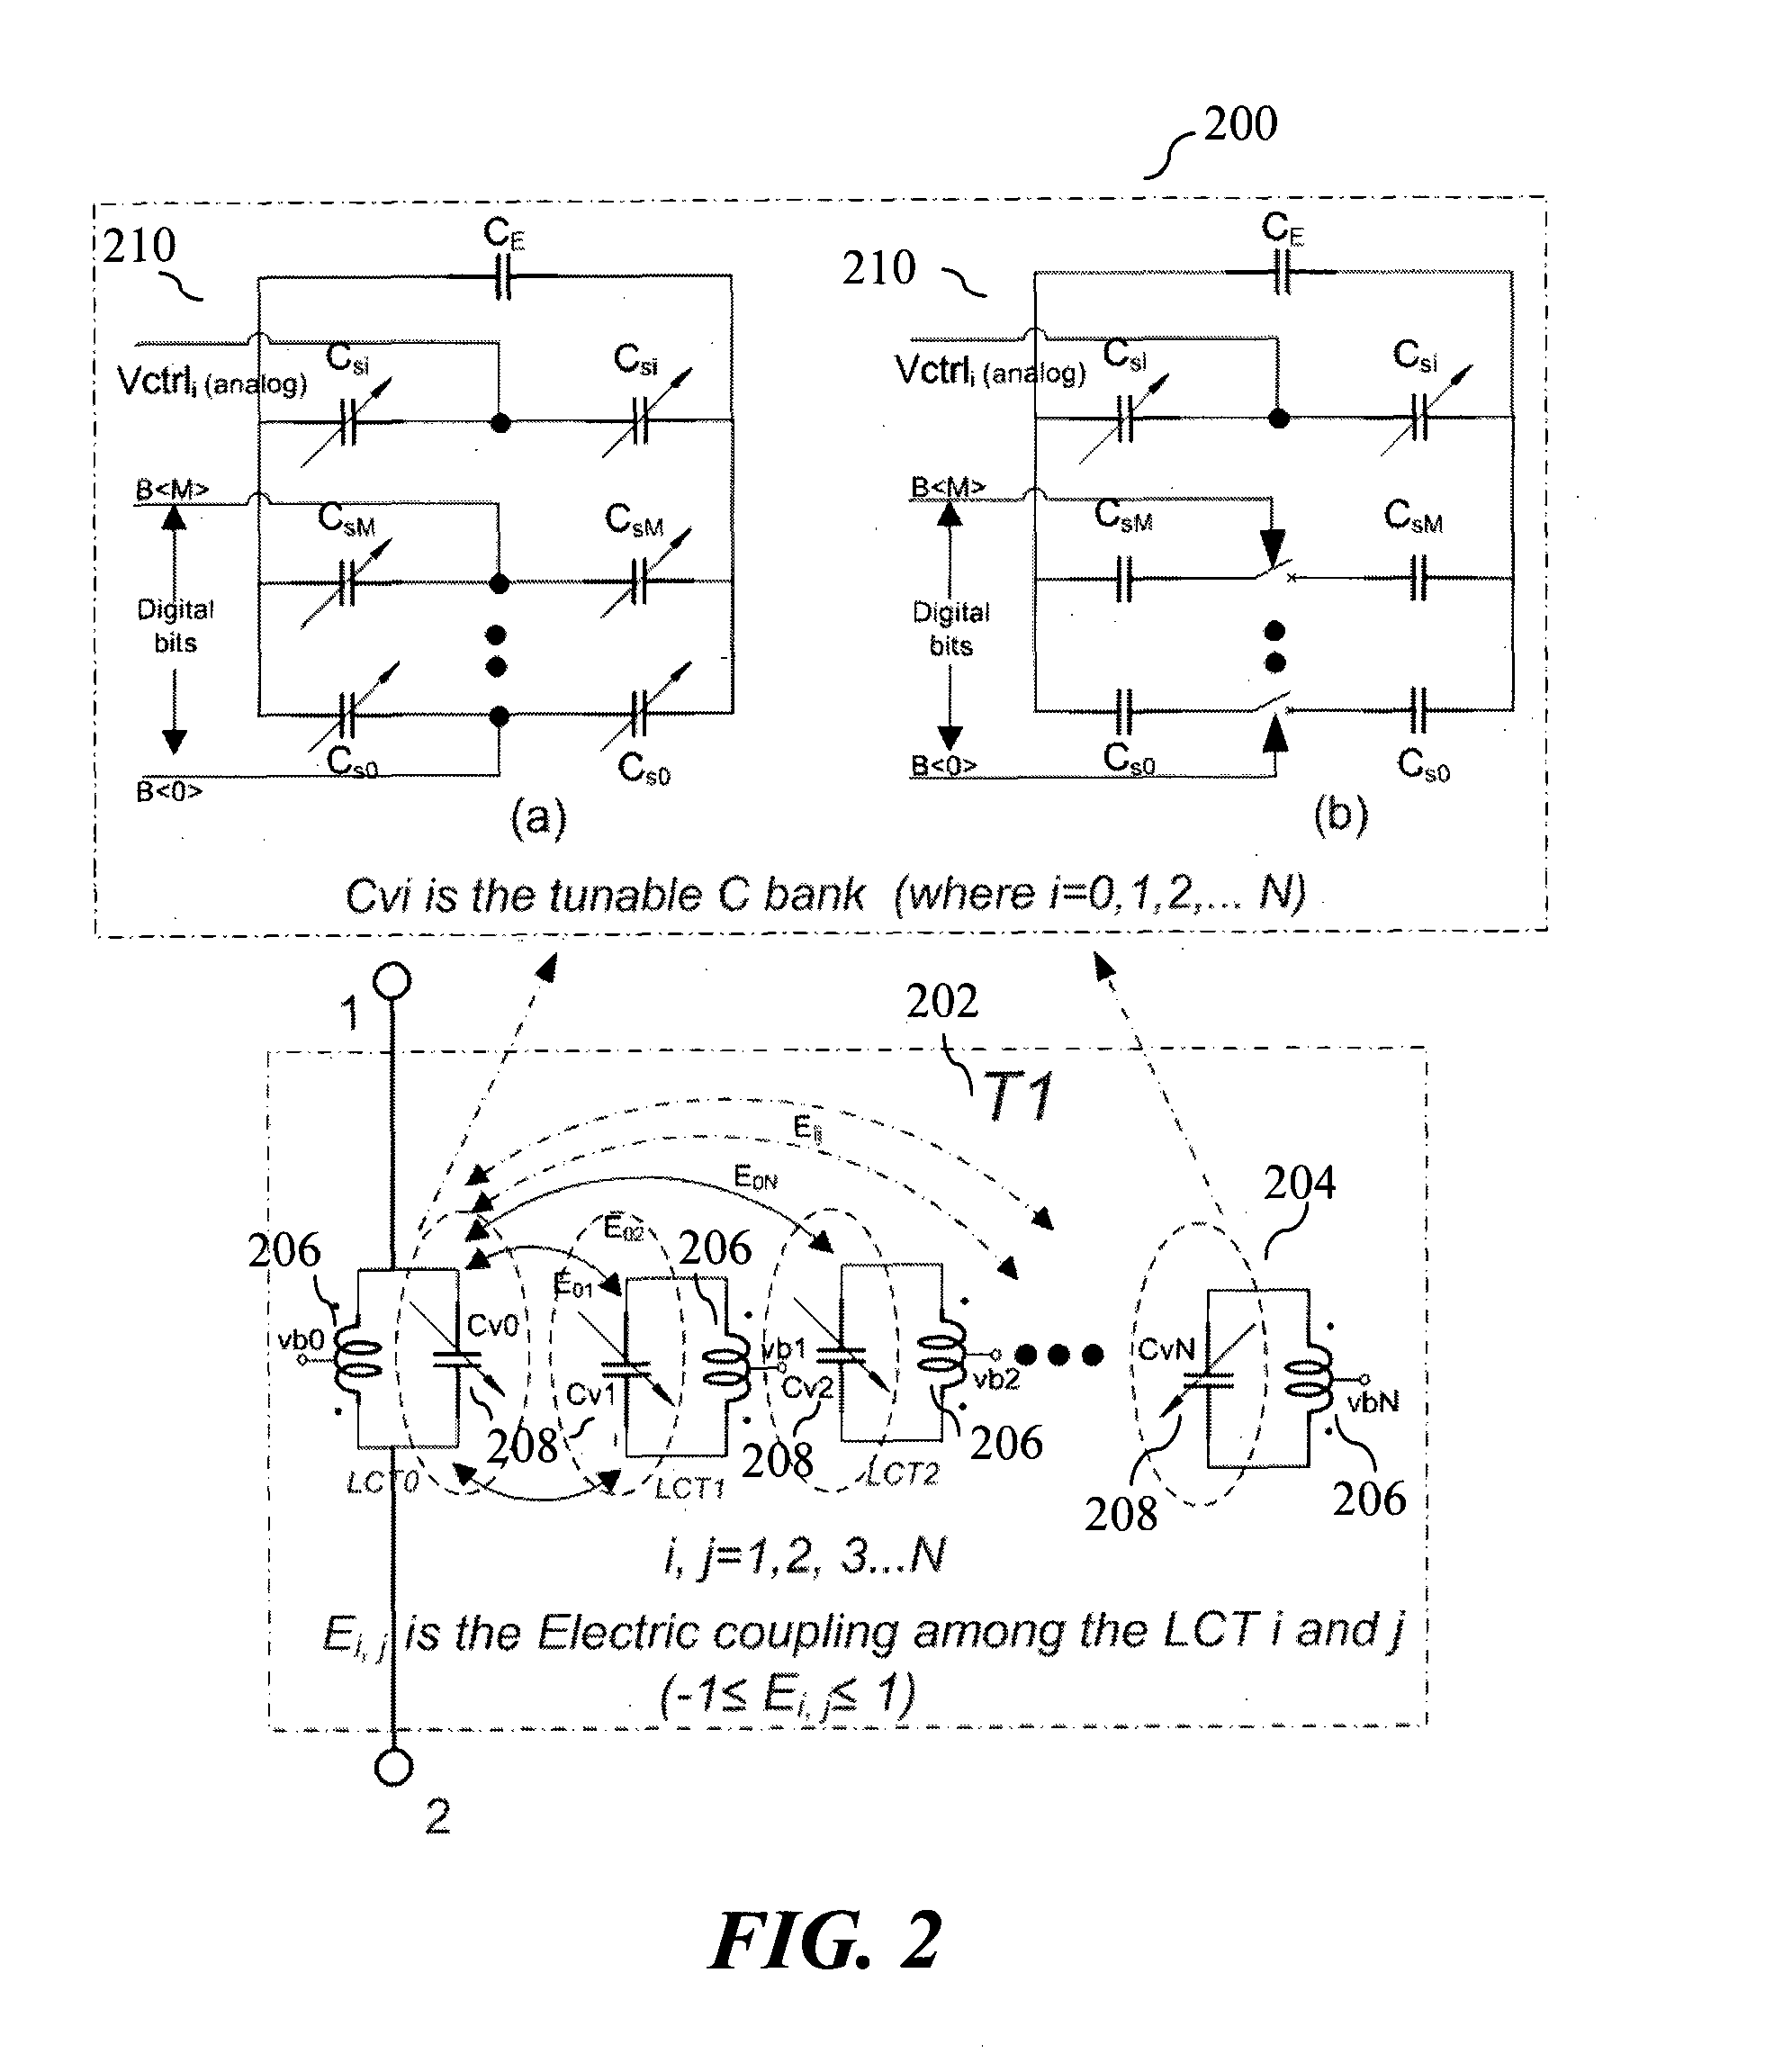 Integrated Circuit Architecture with Strongly Coupled LC Tanks